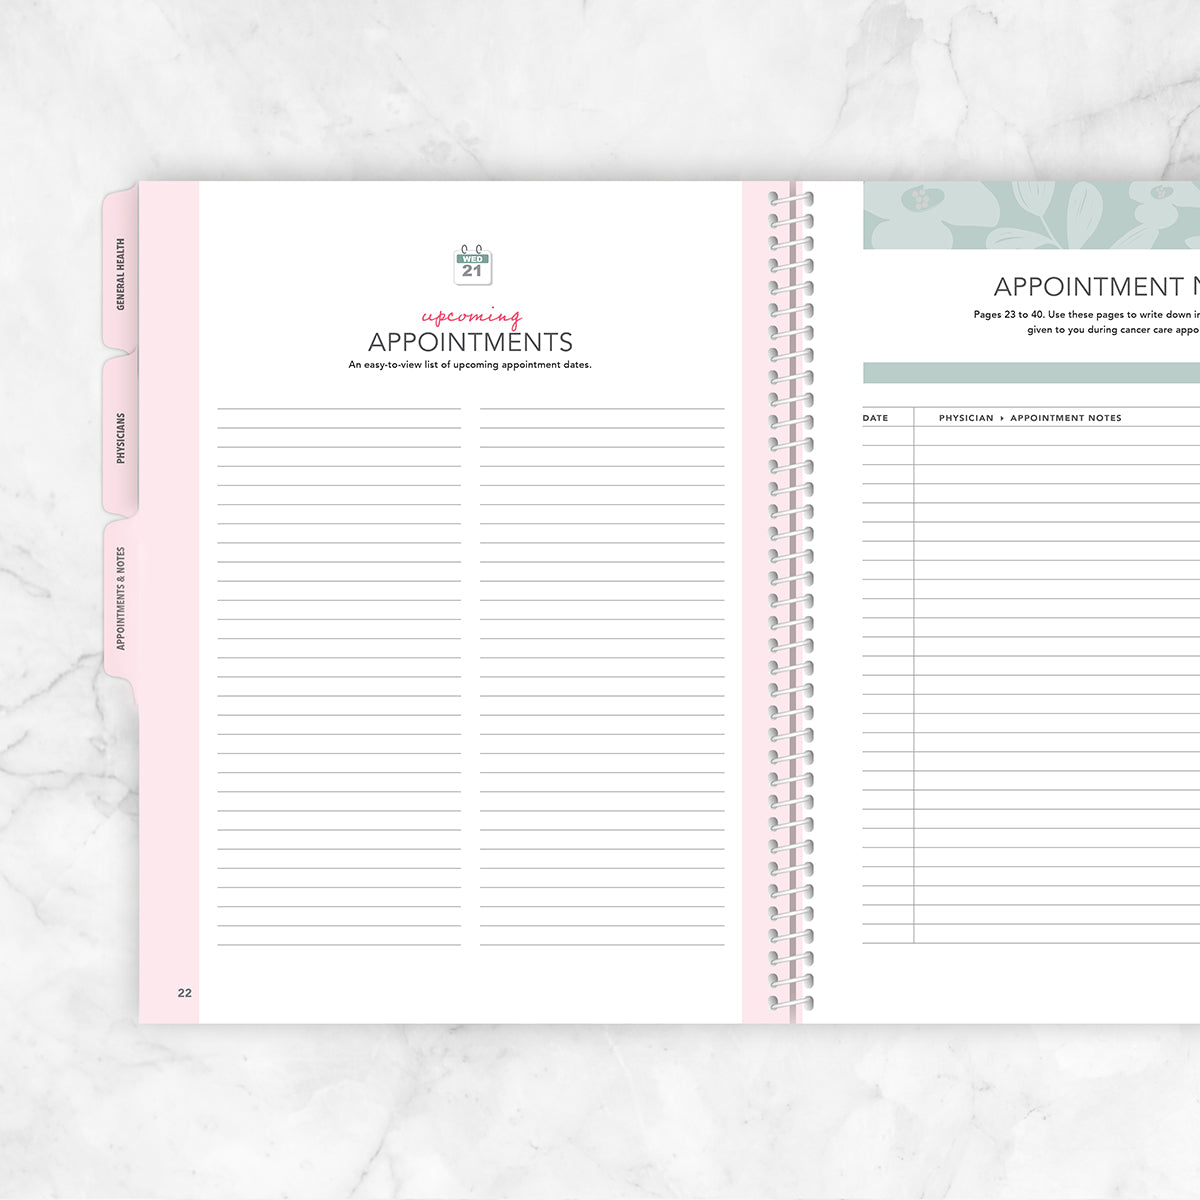 Breast Cancer Journal, Health and Wellness Journal,  Cancer Planner